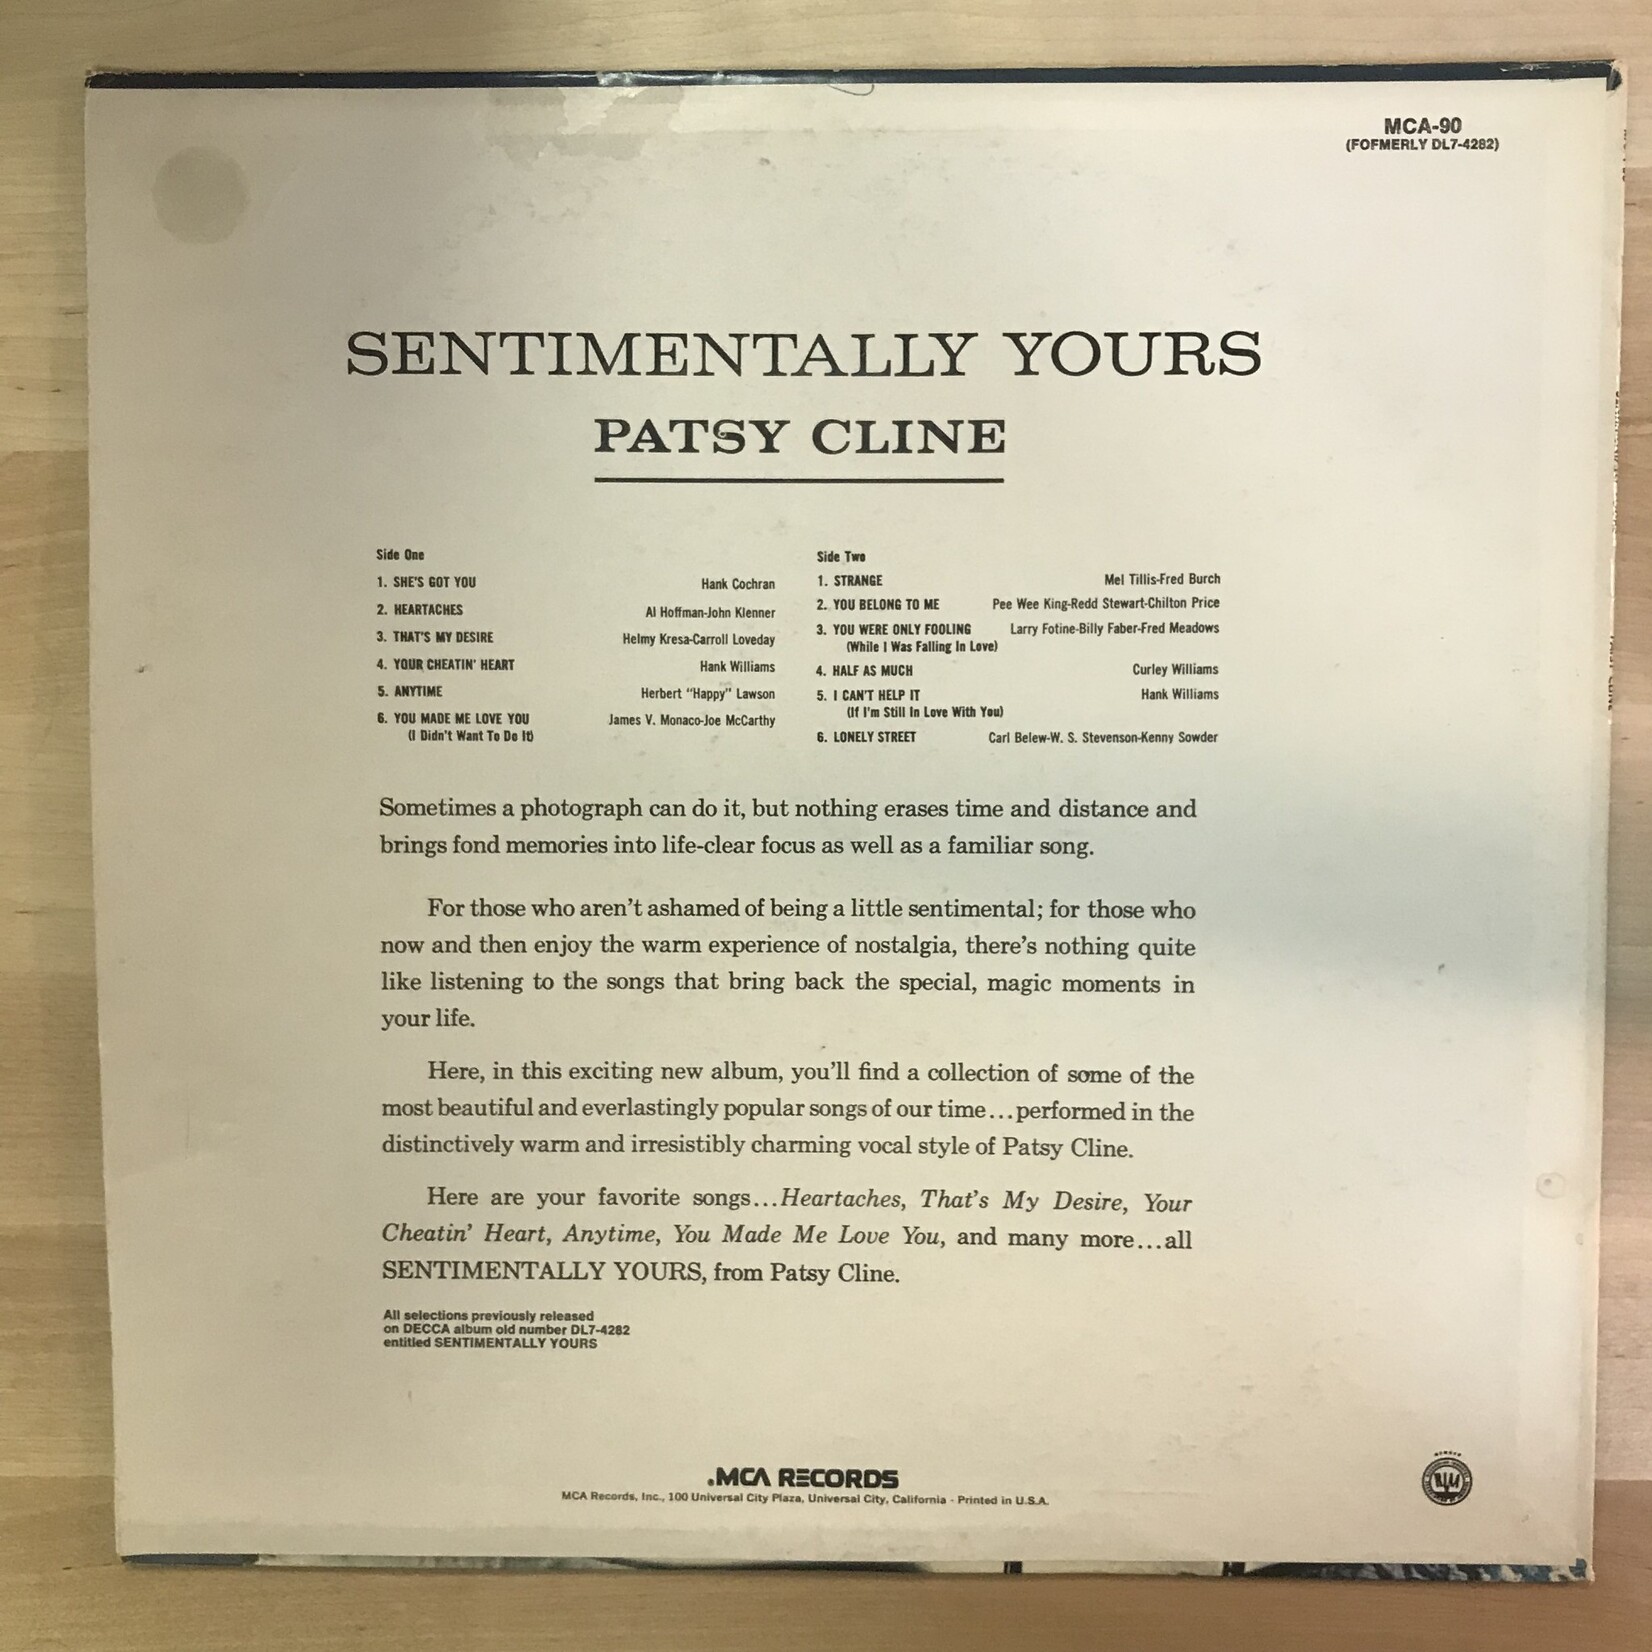 Patsy Cline - Sentimentally Yours - MCA90 - Vinyl LP (USED - RE)